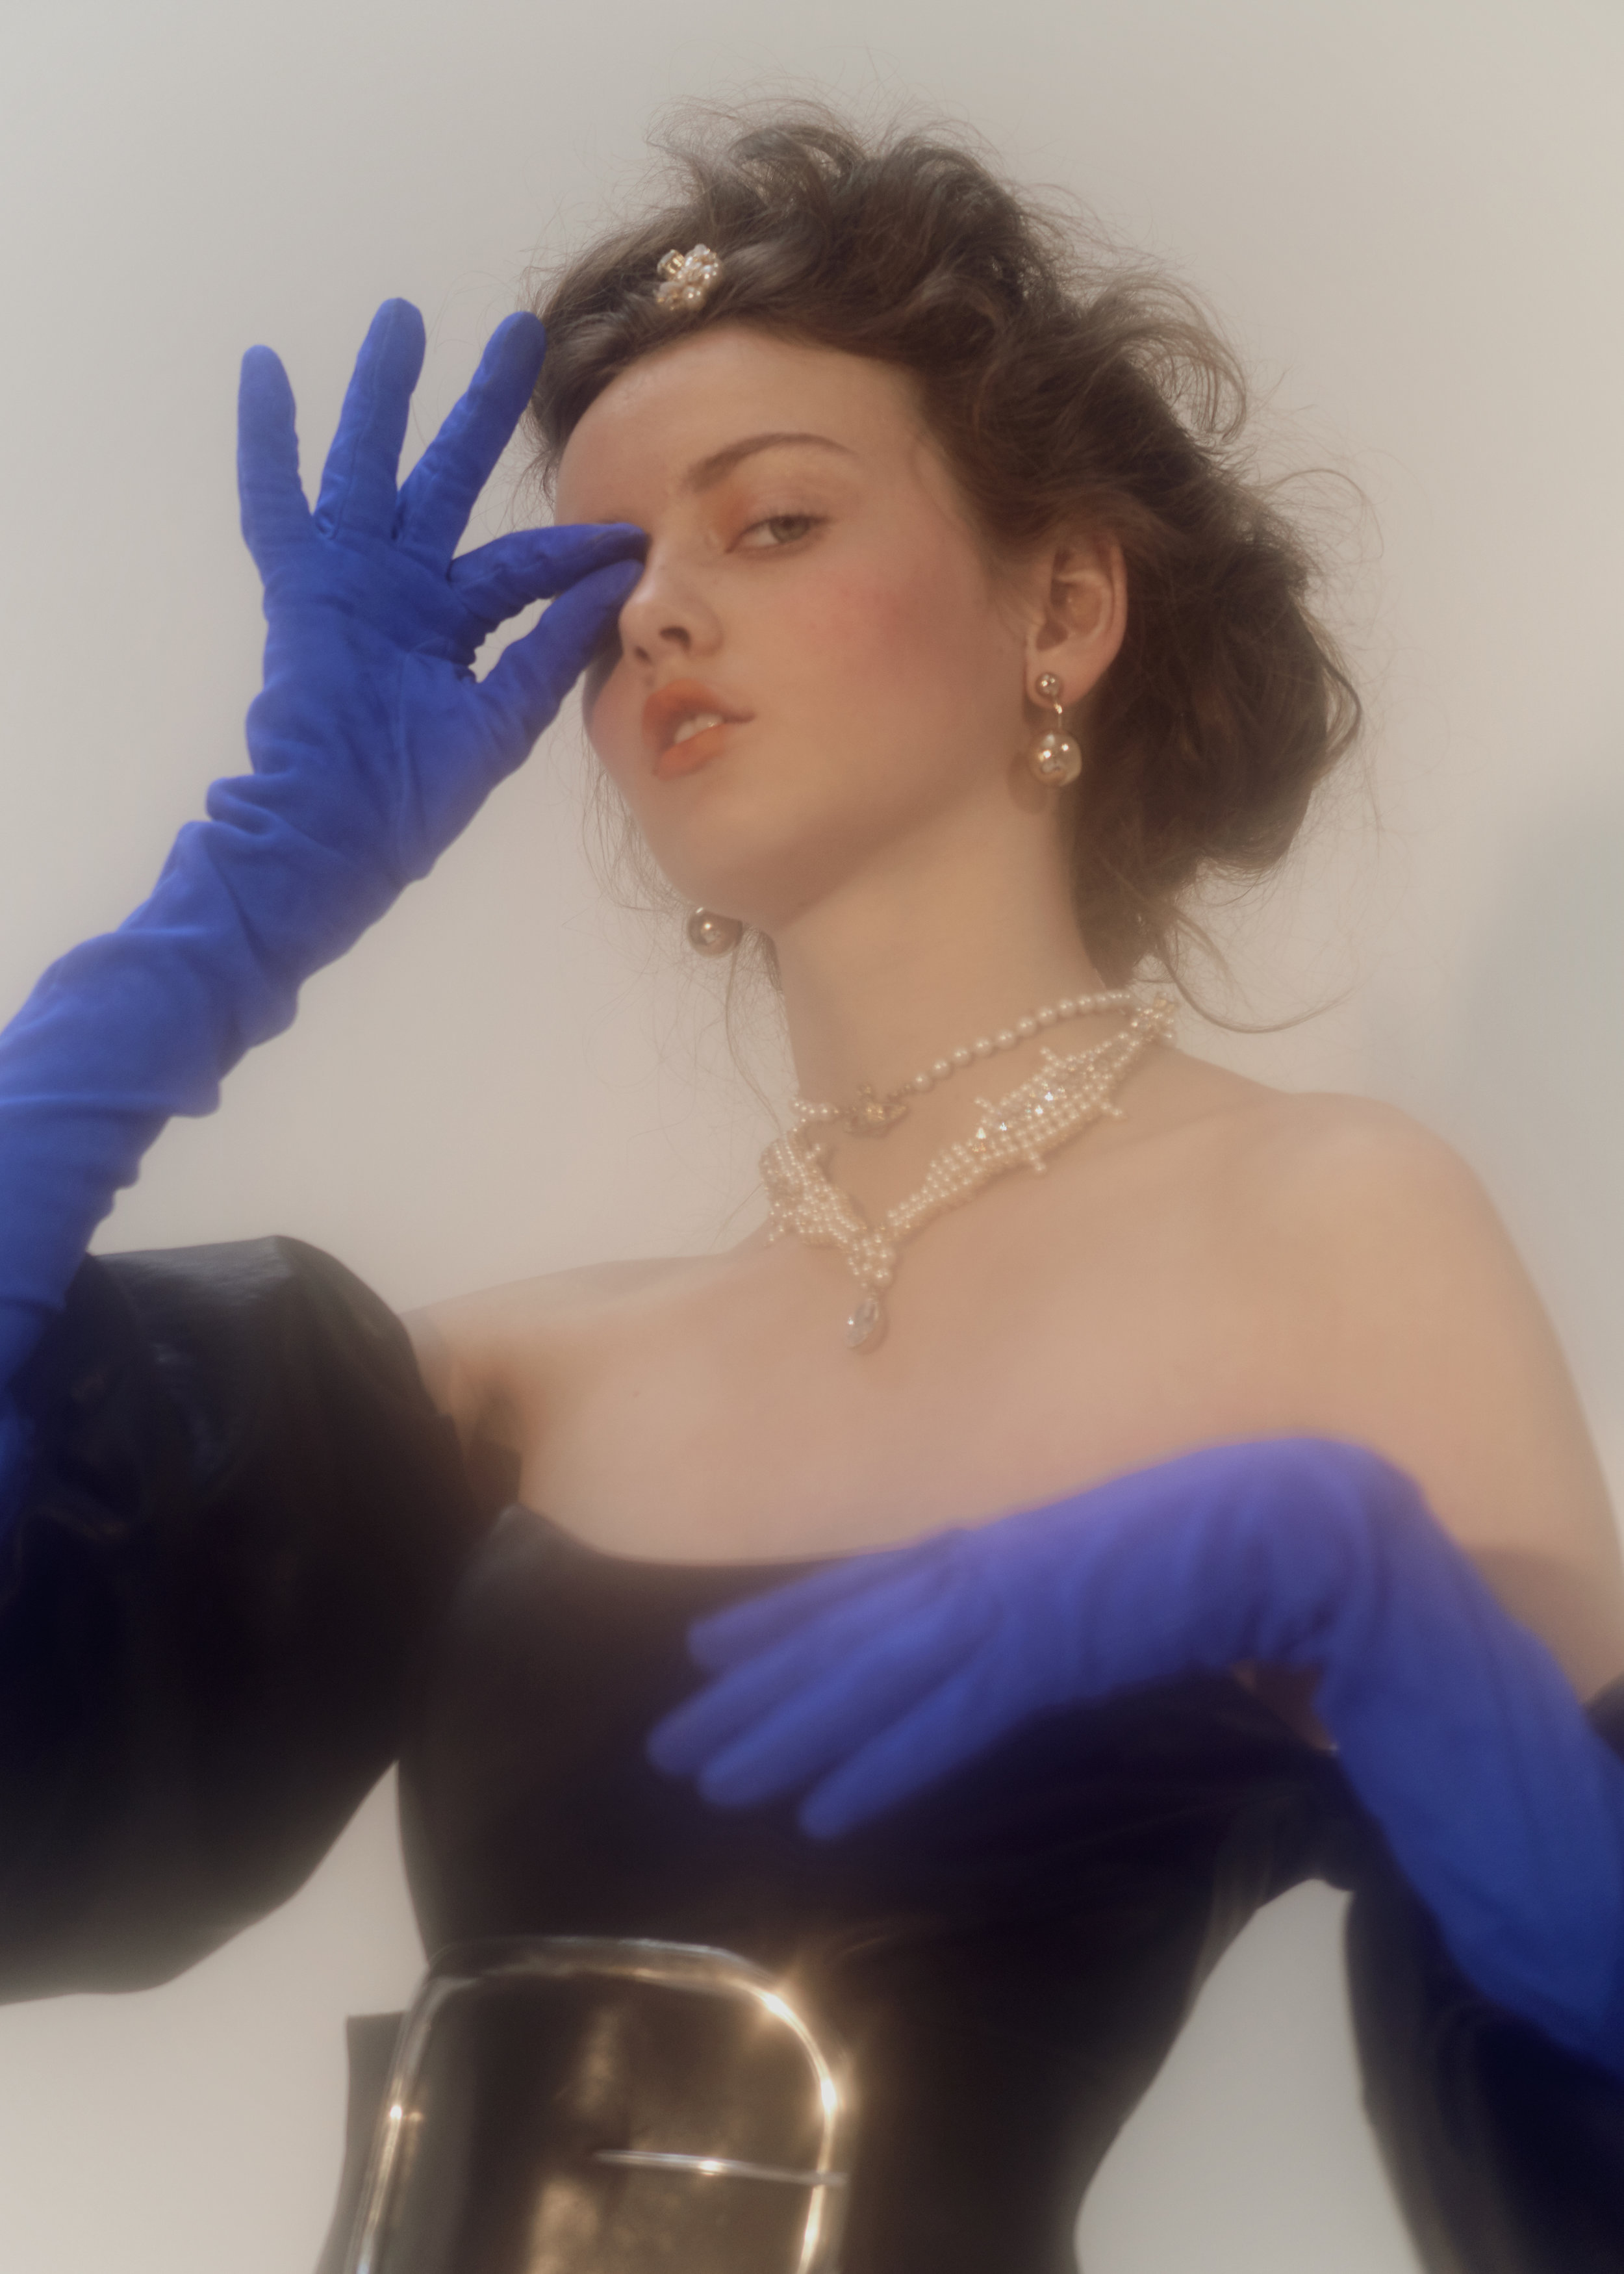 APART online_Lady-with-gloves_015.jpg